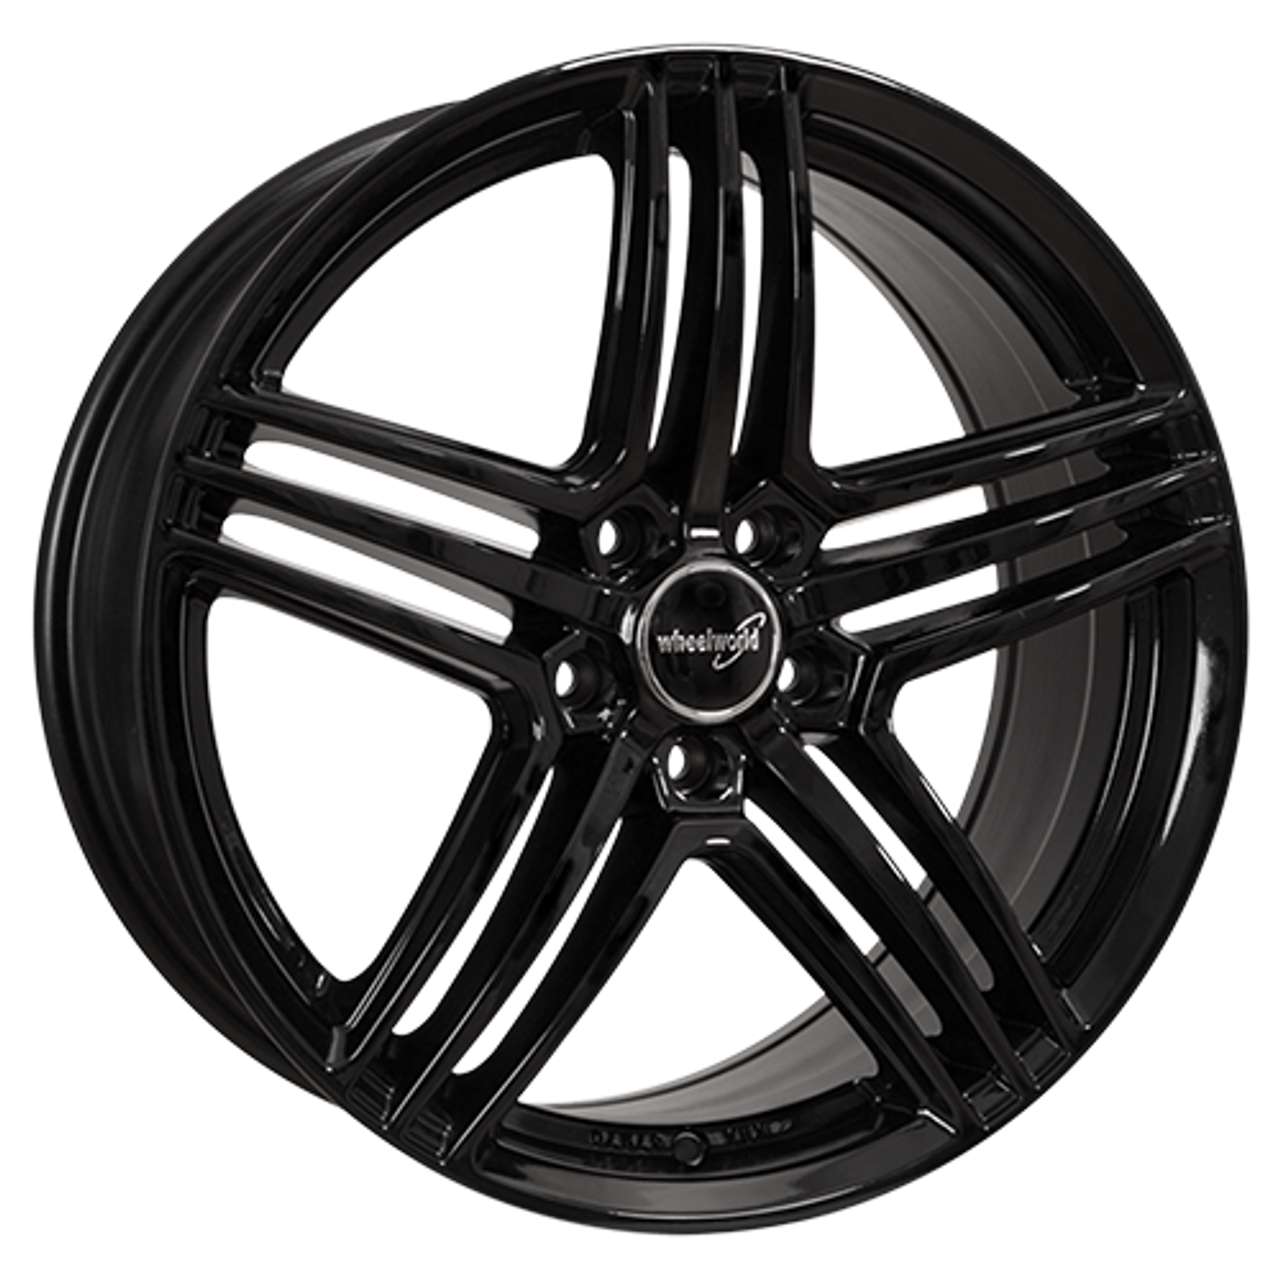 WHEELWORLD-2DRV WH12 black glossy painted 7.5Jx17 5x100 ET35